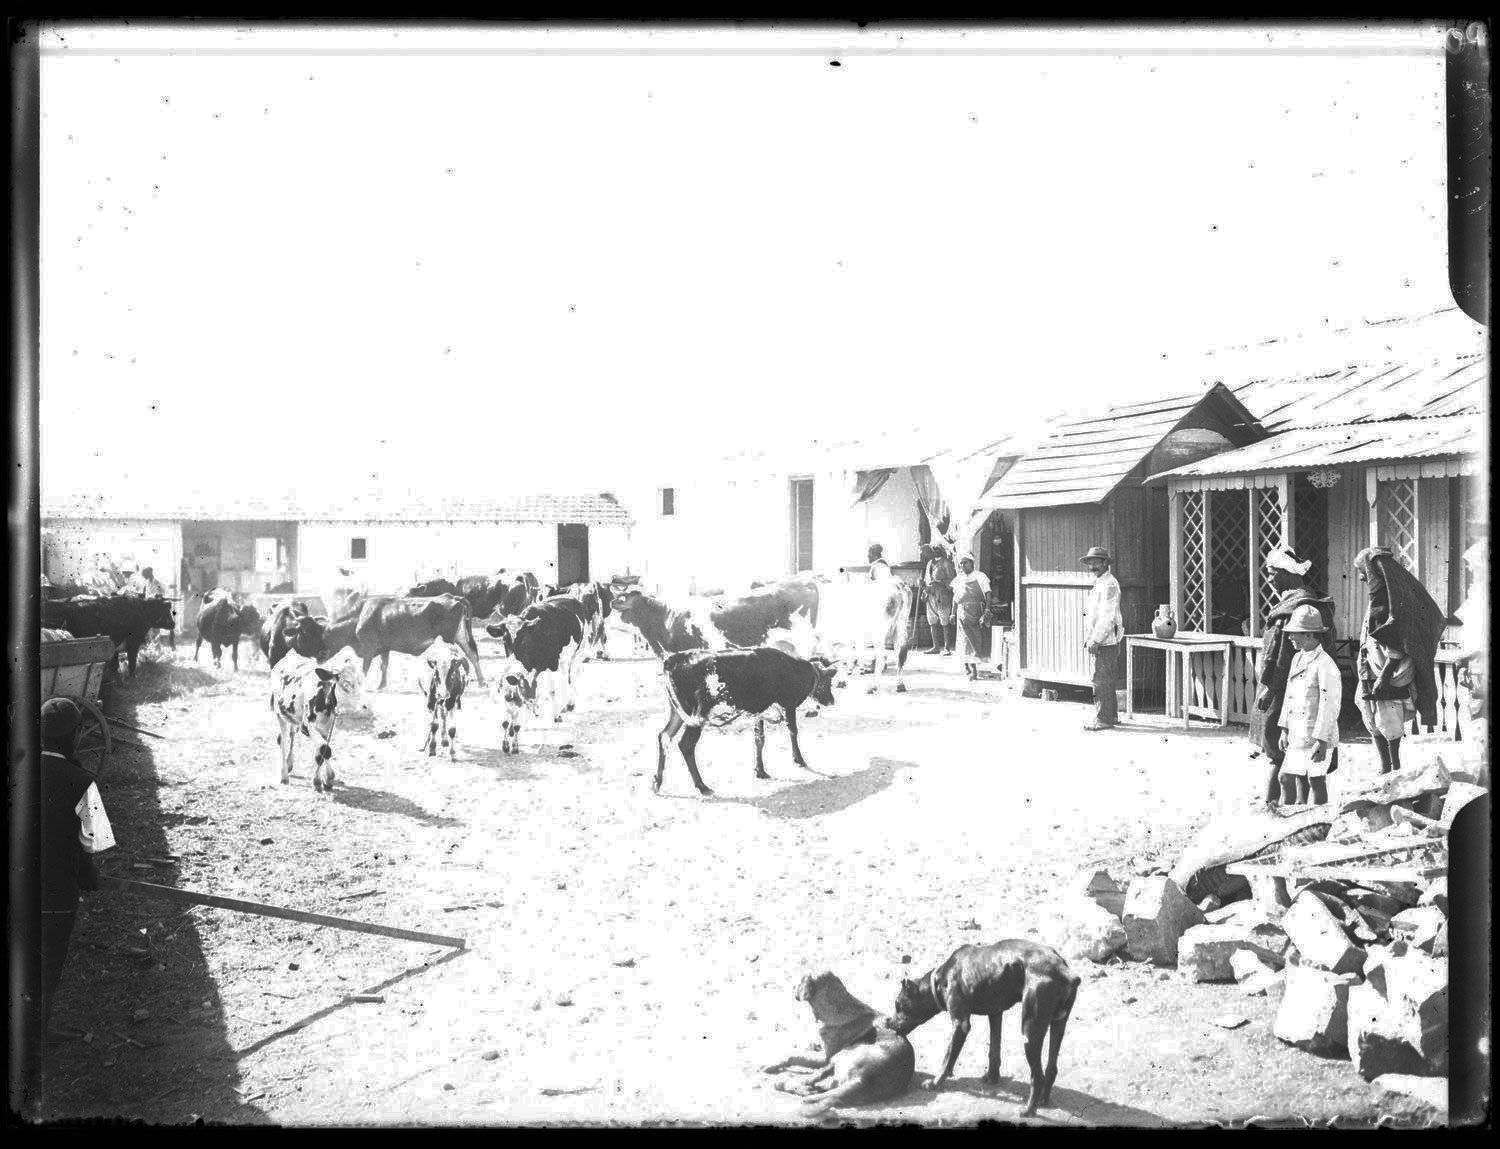 Cows, dogs and people in a courtyard, probably in Tangier